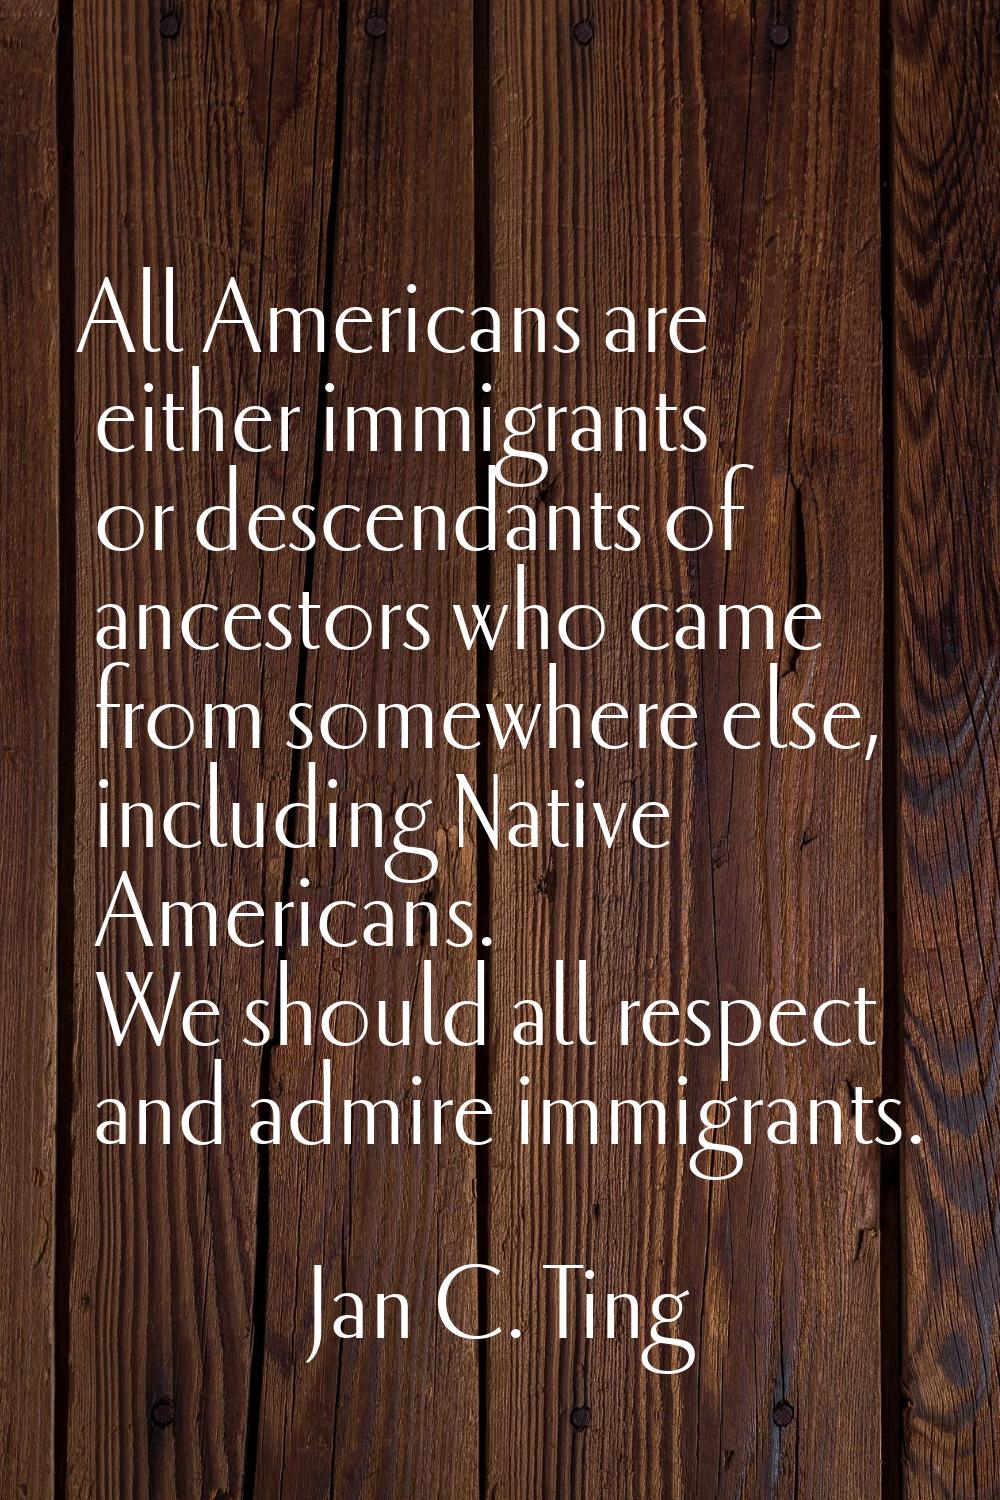 All Americans are either immigrants or descendants of ancestors who came from somewhere else, inclu